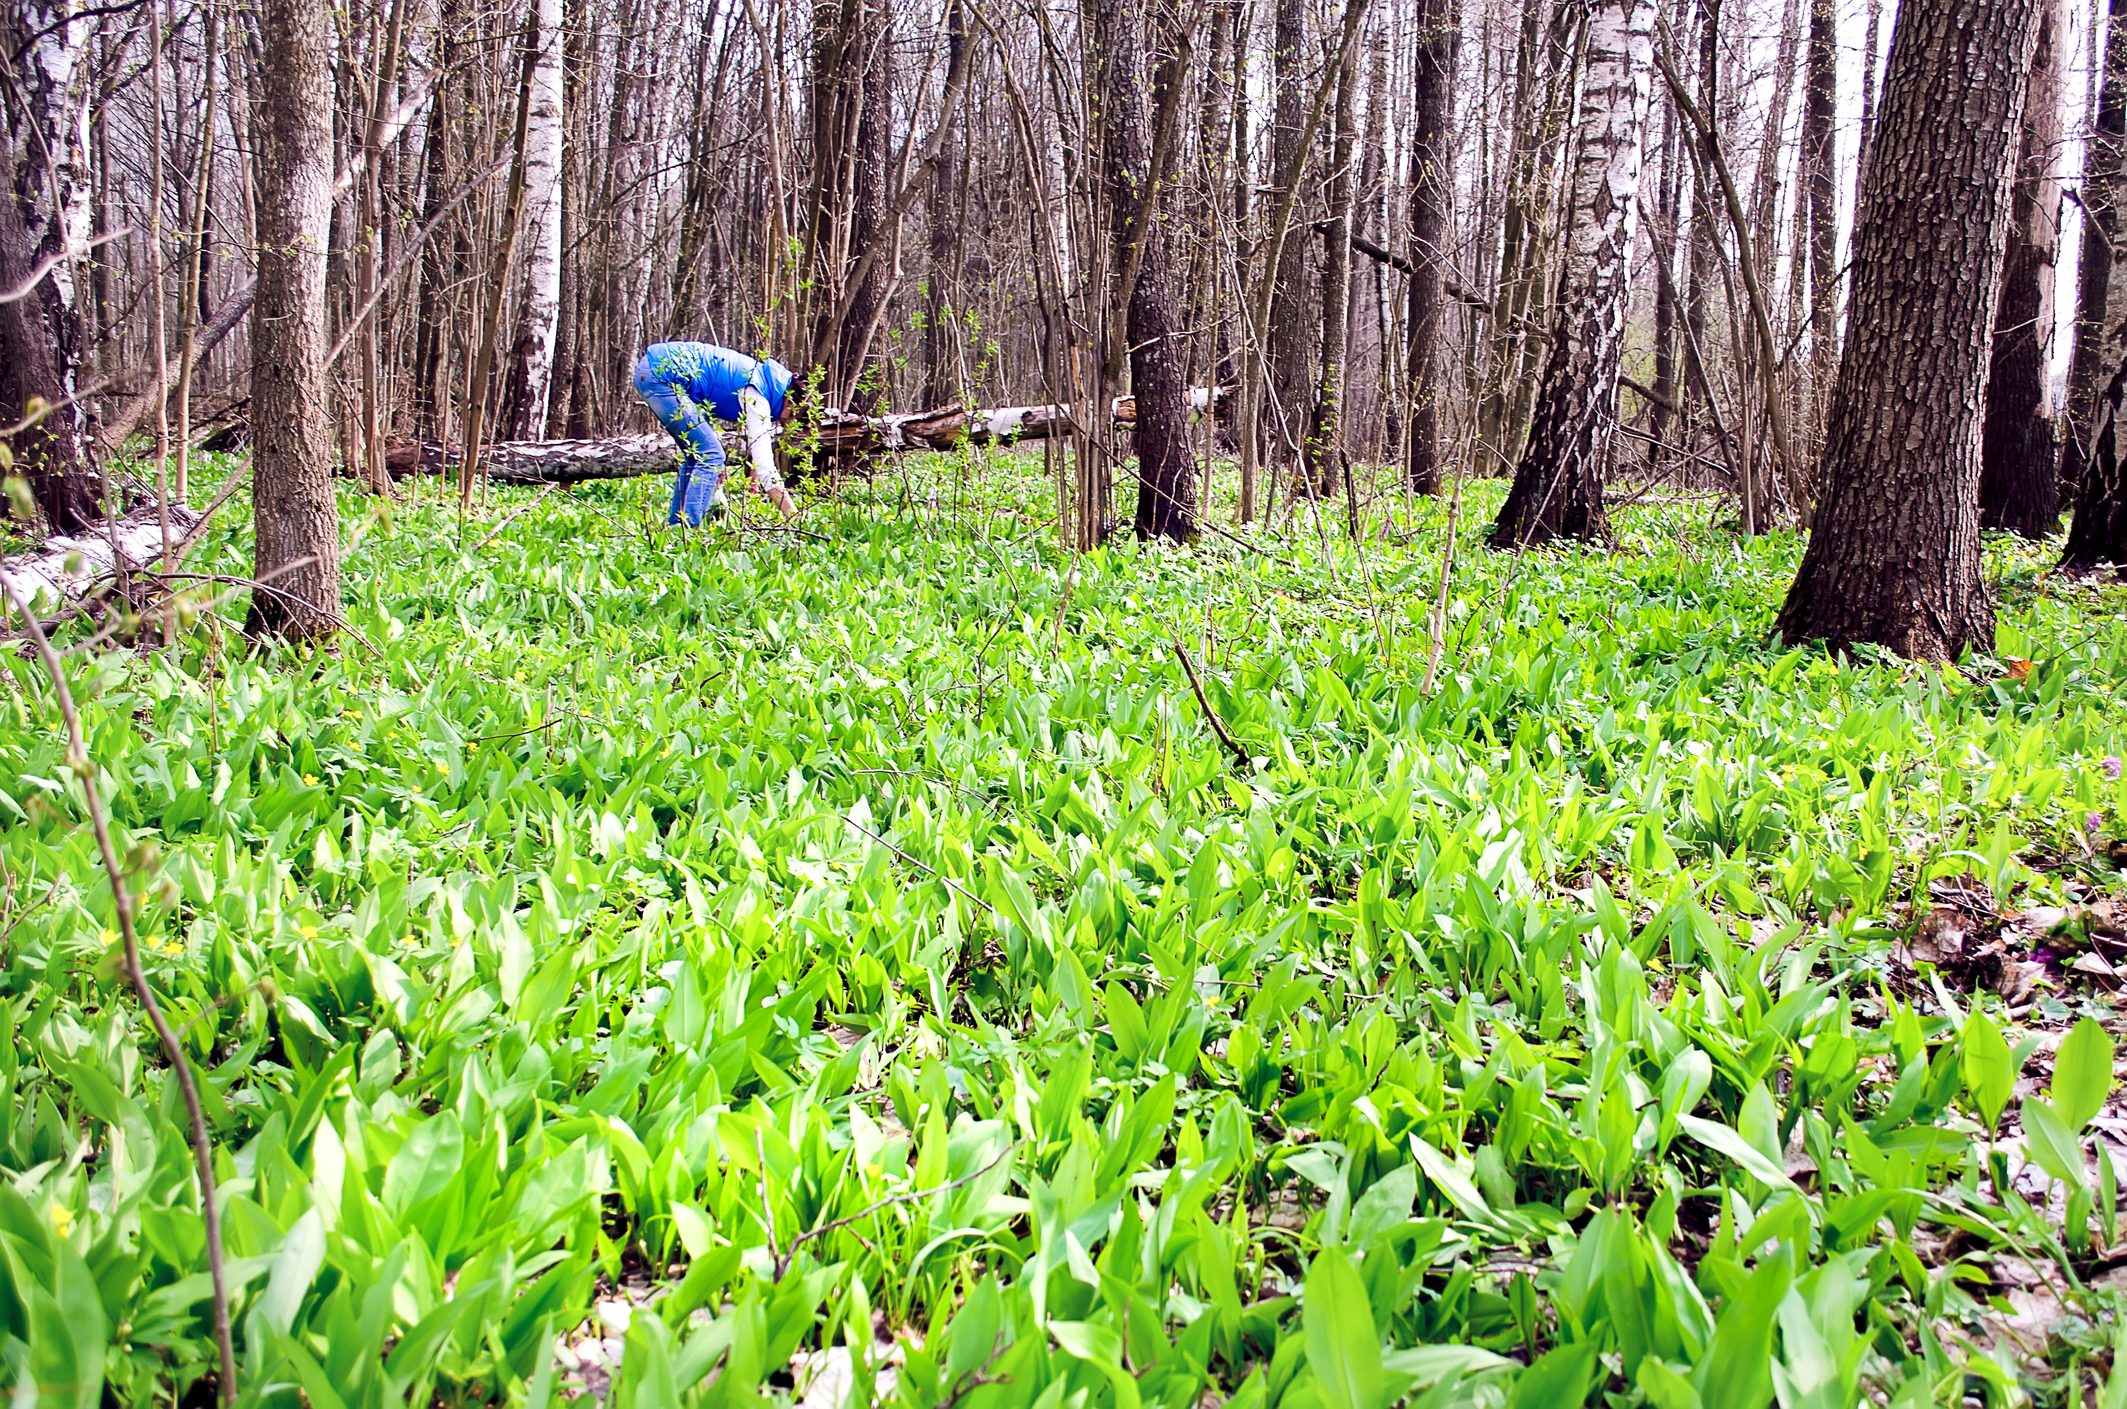 How To Farm In The Woods—An Introduction to Non-Timber Forest Products (NTFPs)